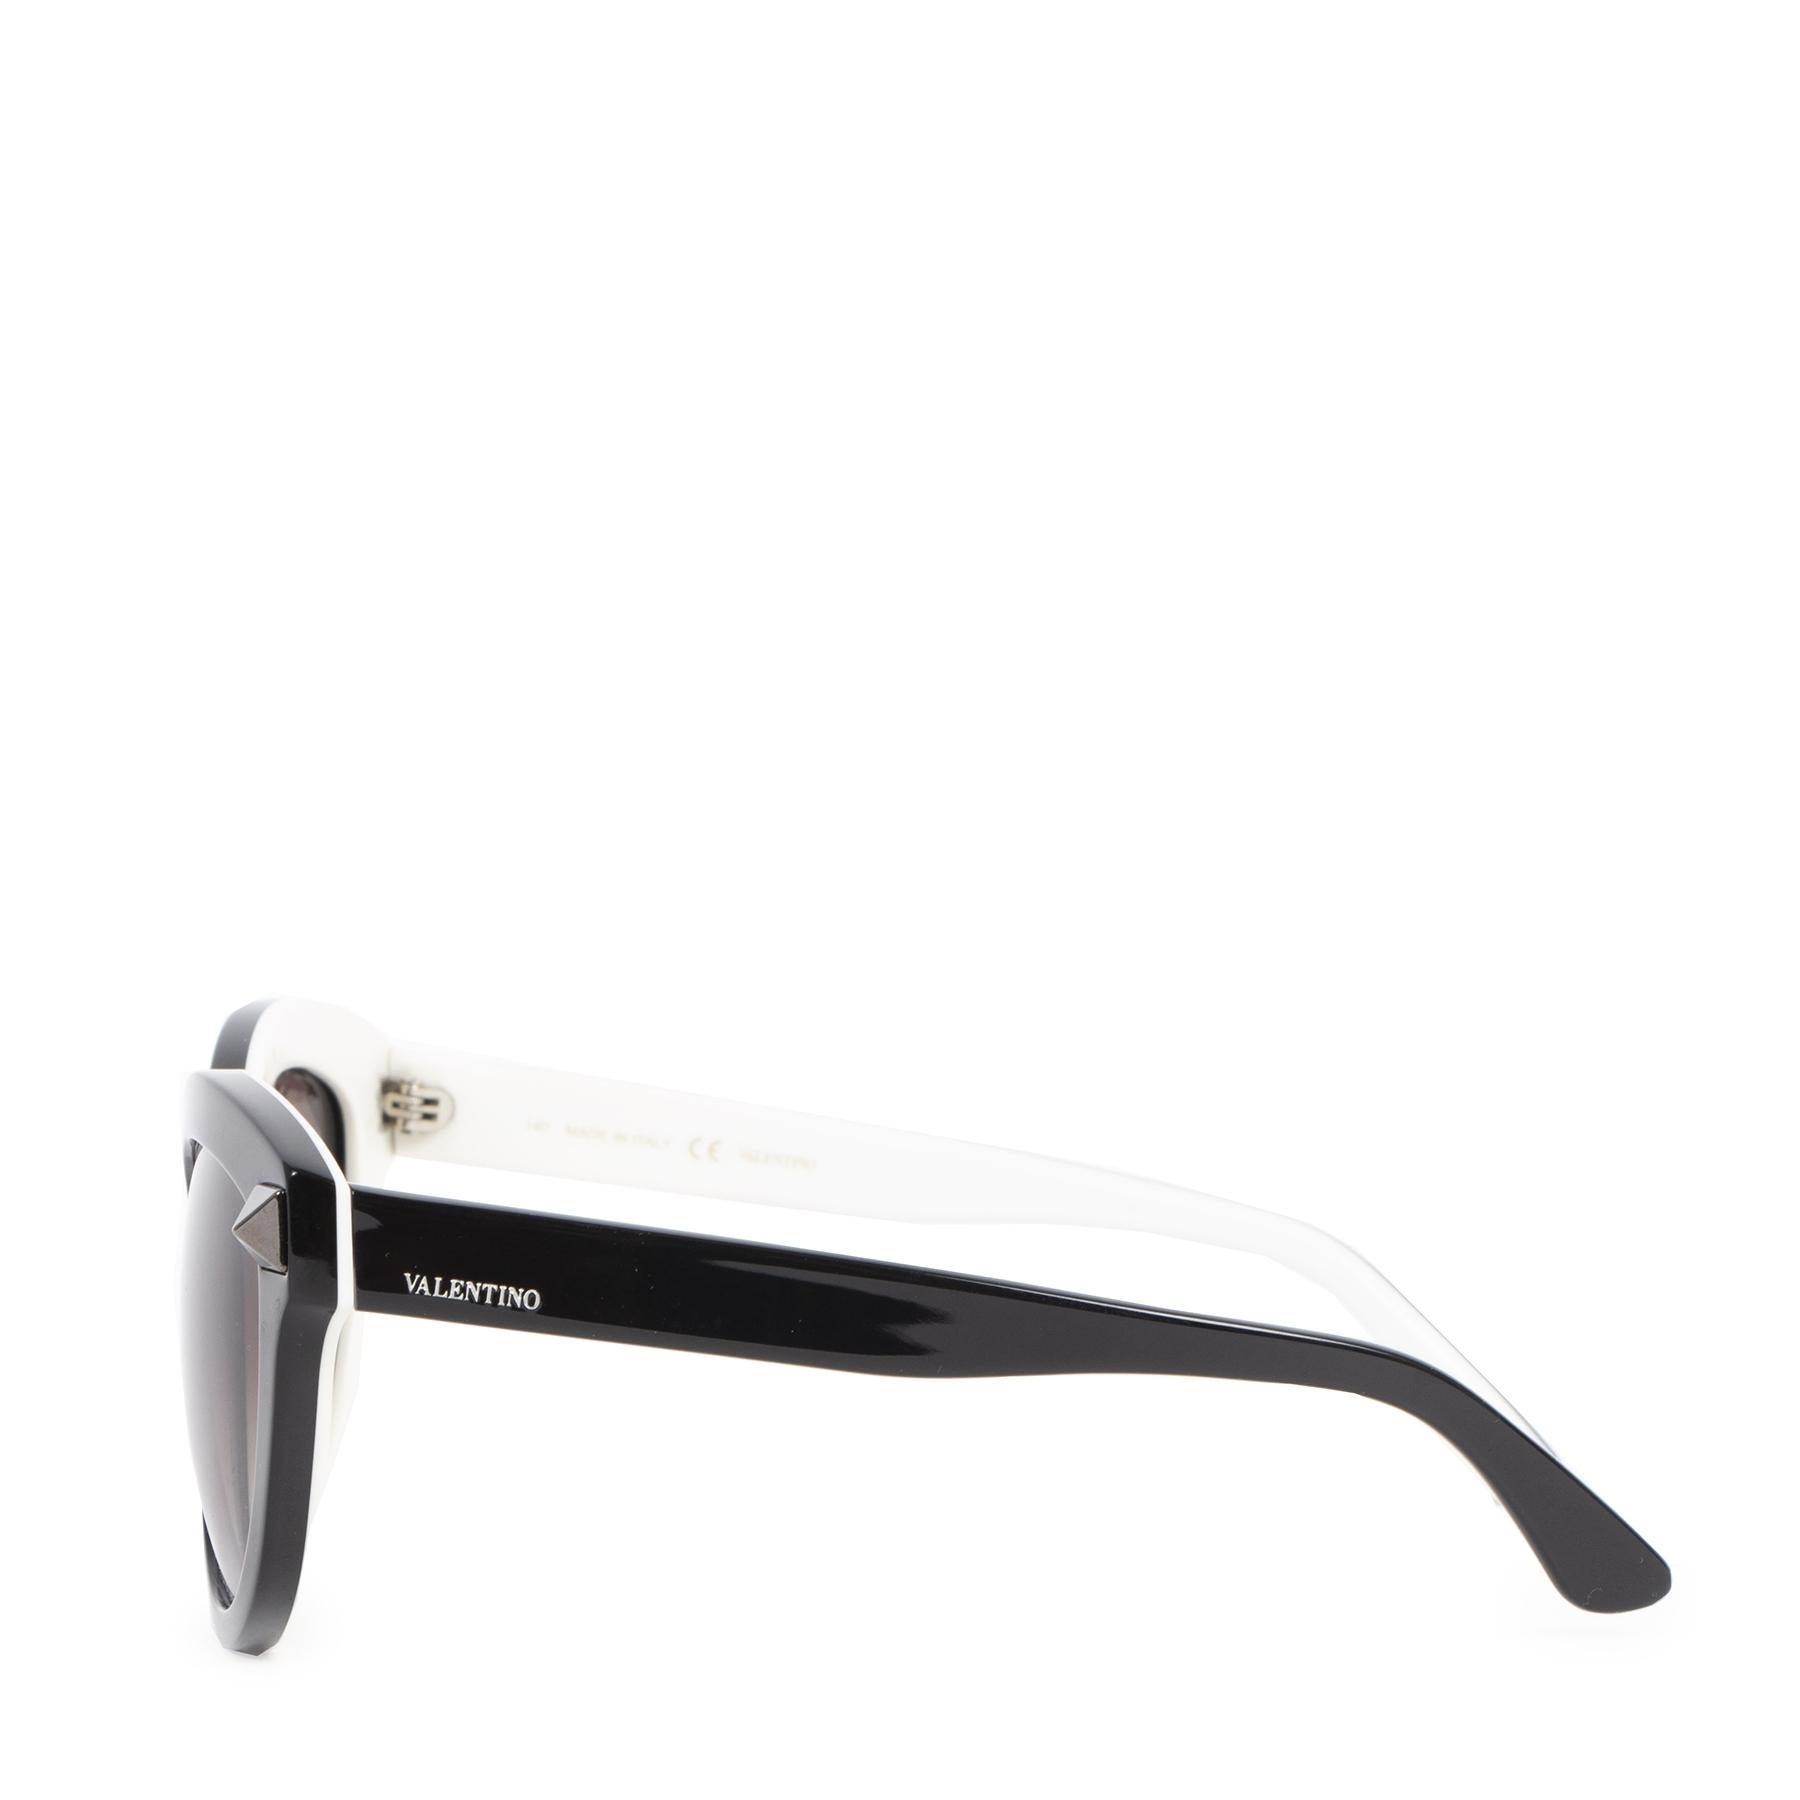 Very good preloved condition

Valentino Black Stud Cat-Eye Sunglasses

Finish your look with these edgy Valentino sunglasses. The sunglasses have a gorgeous black and white design, featuring metal grey studs. Match with a black outfit for a total